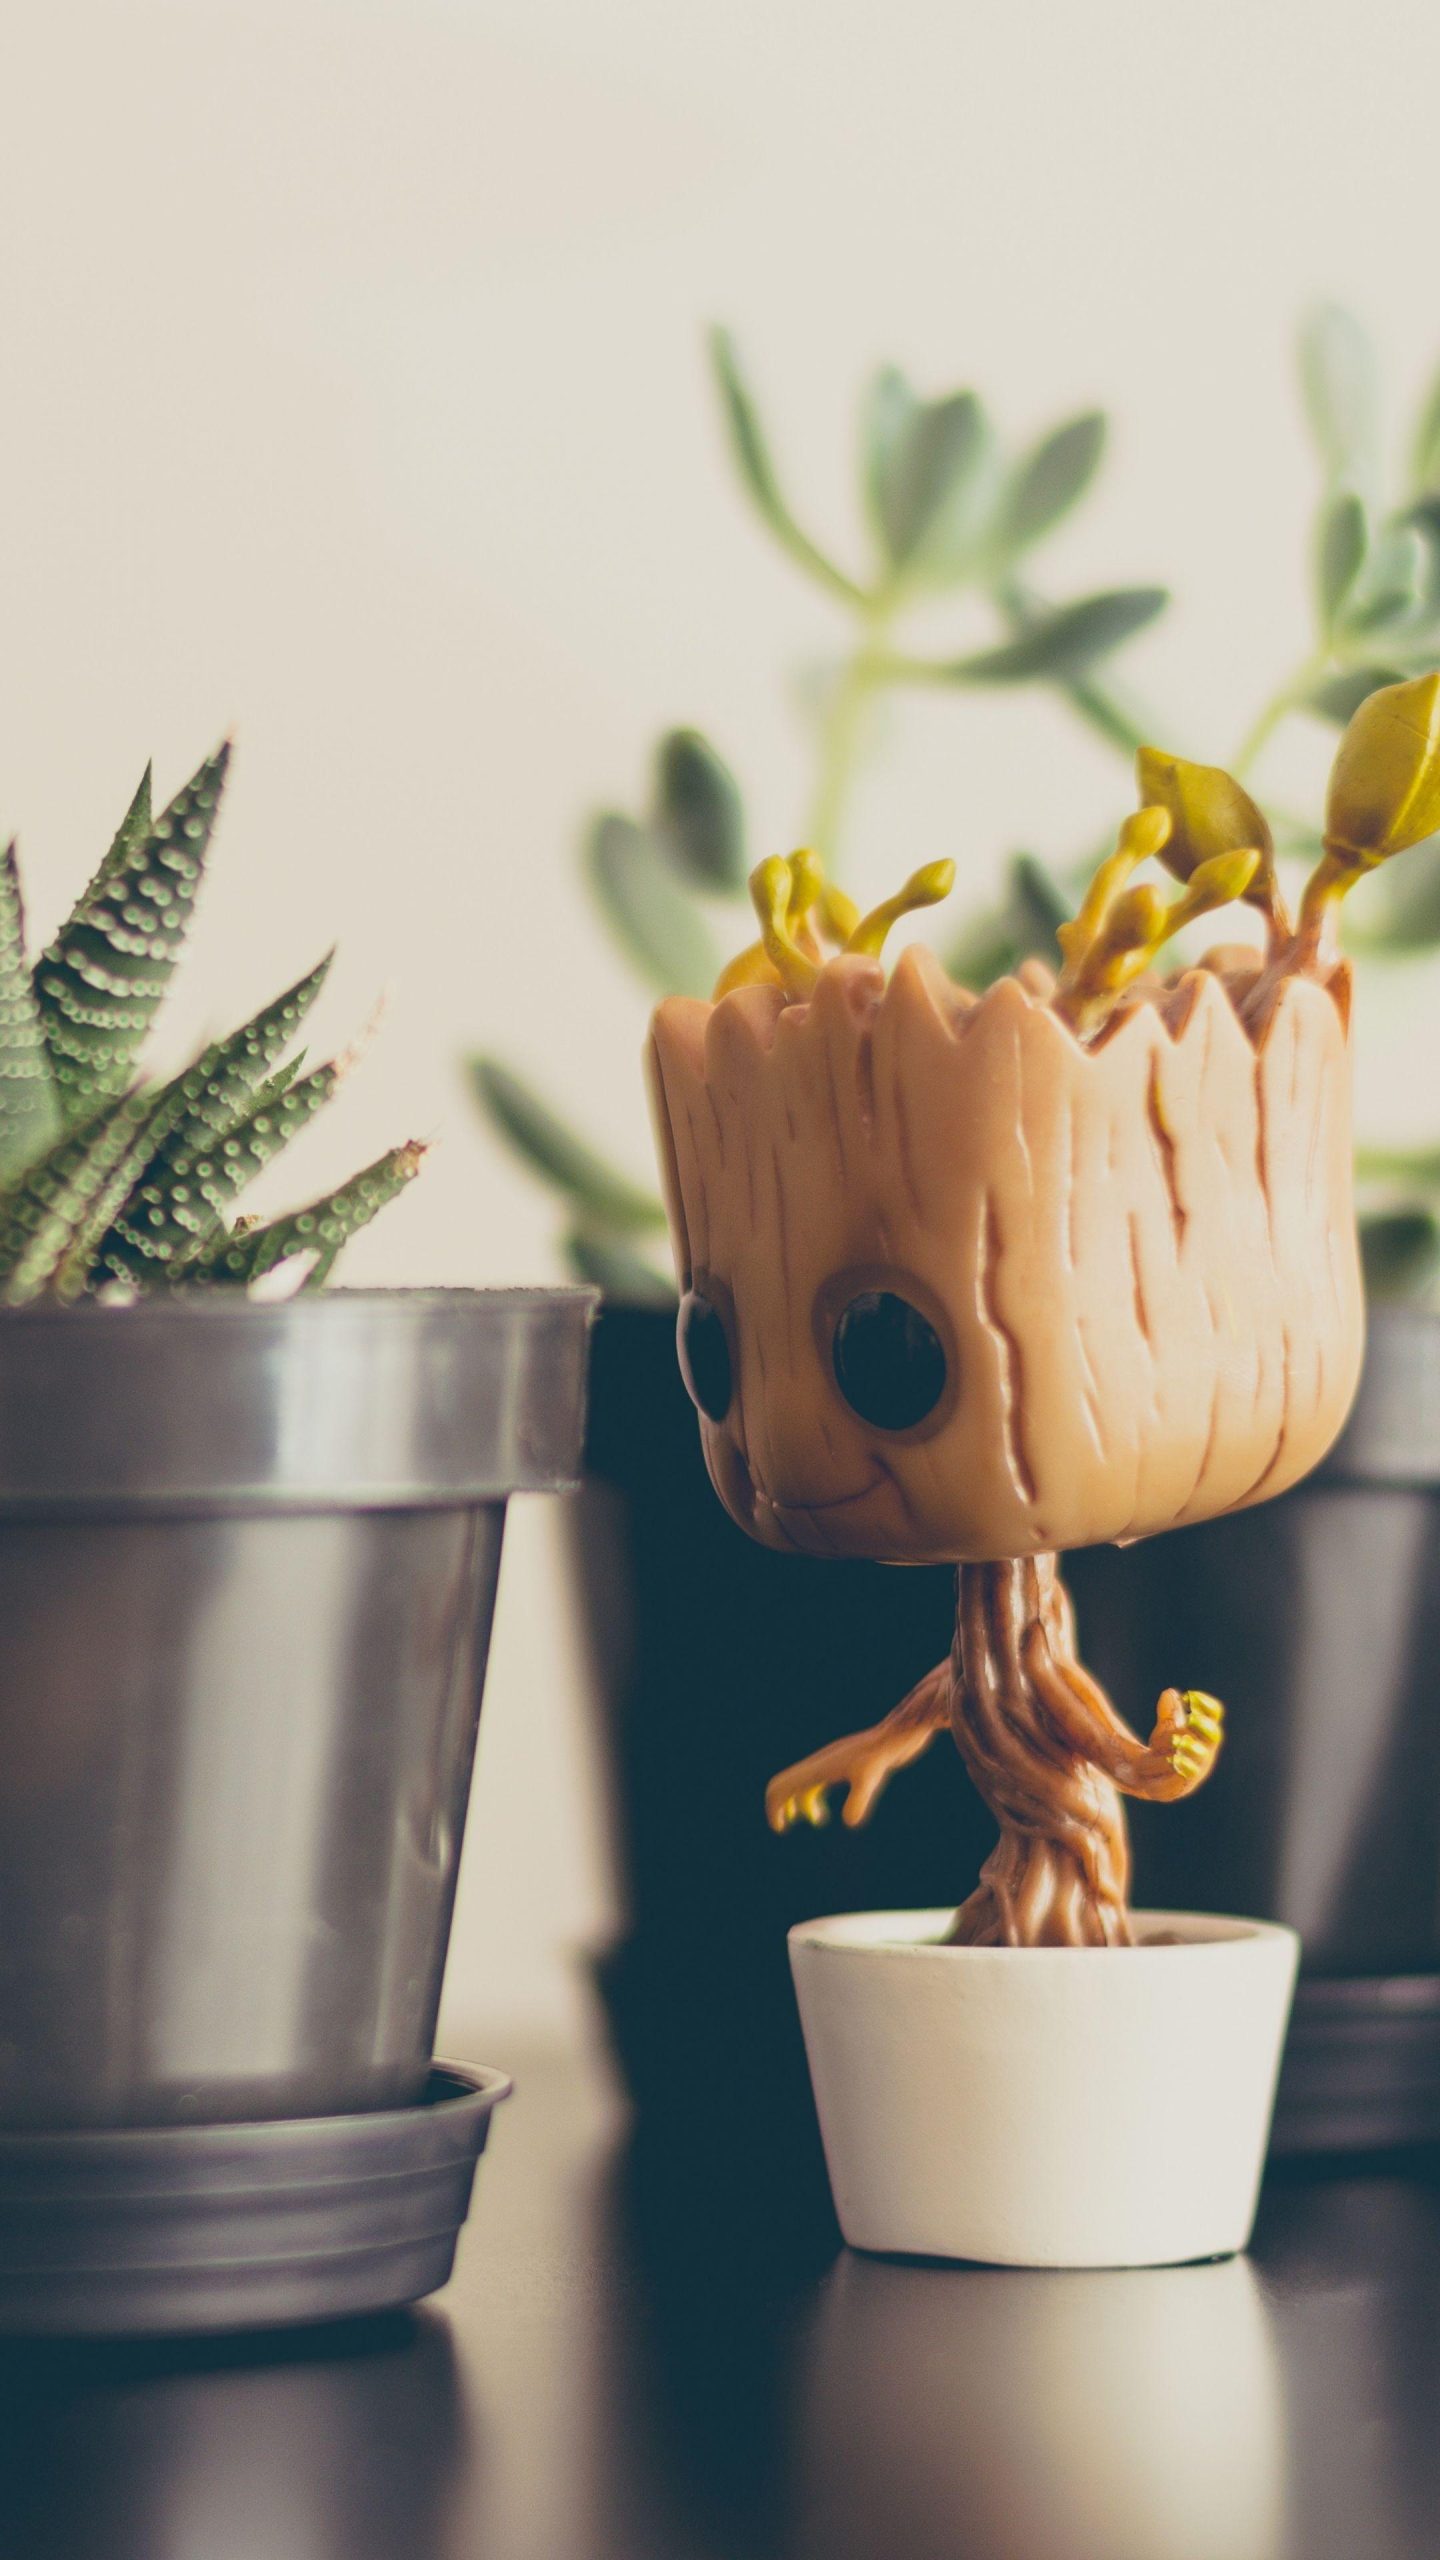 Cute Baby Groot Guardians Of The Galaxy Iphone wallpaper 4k